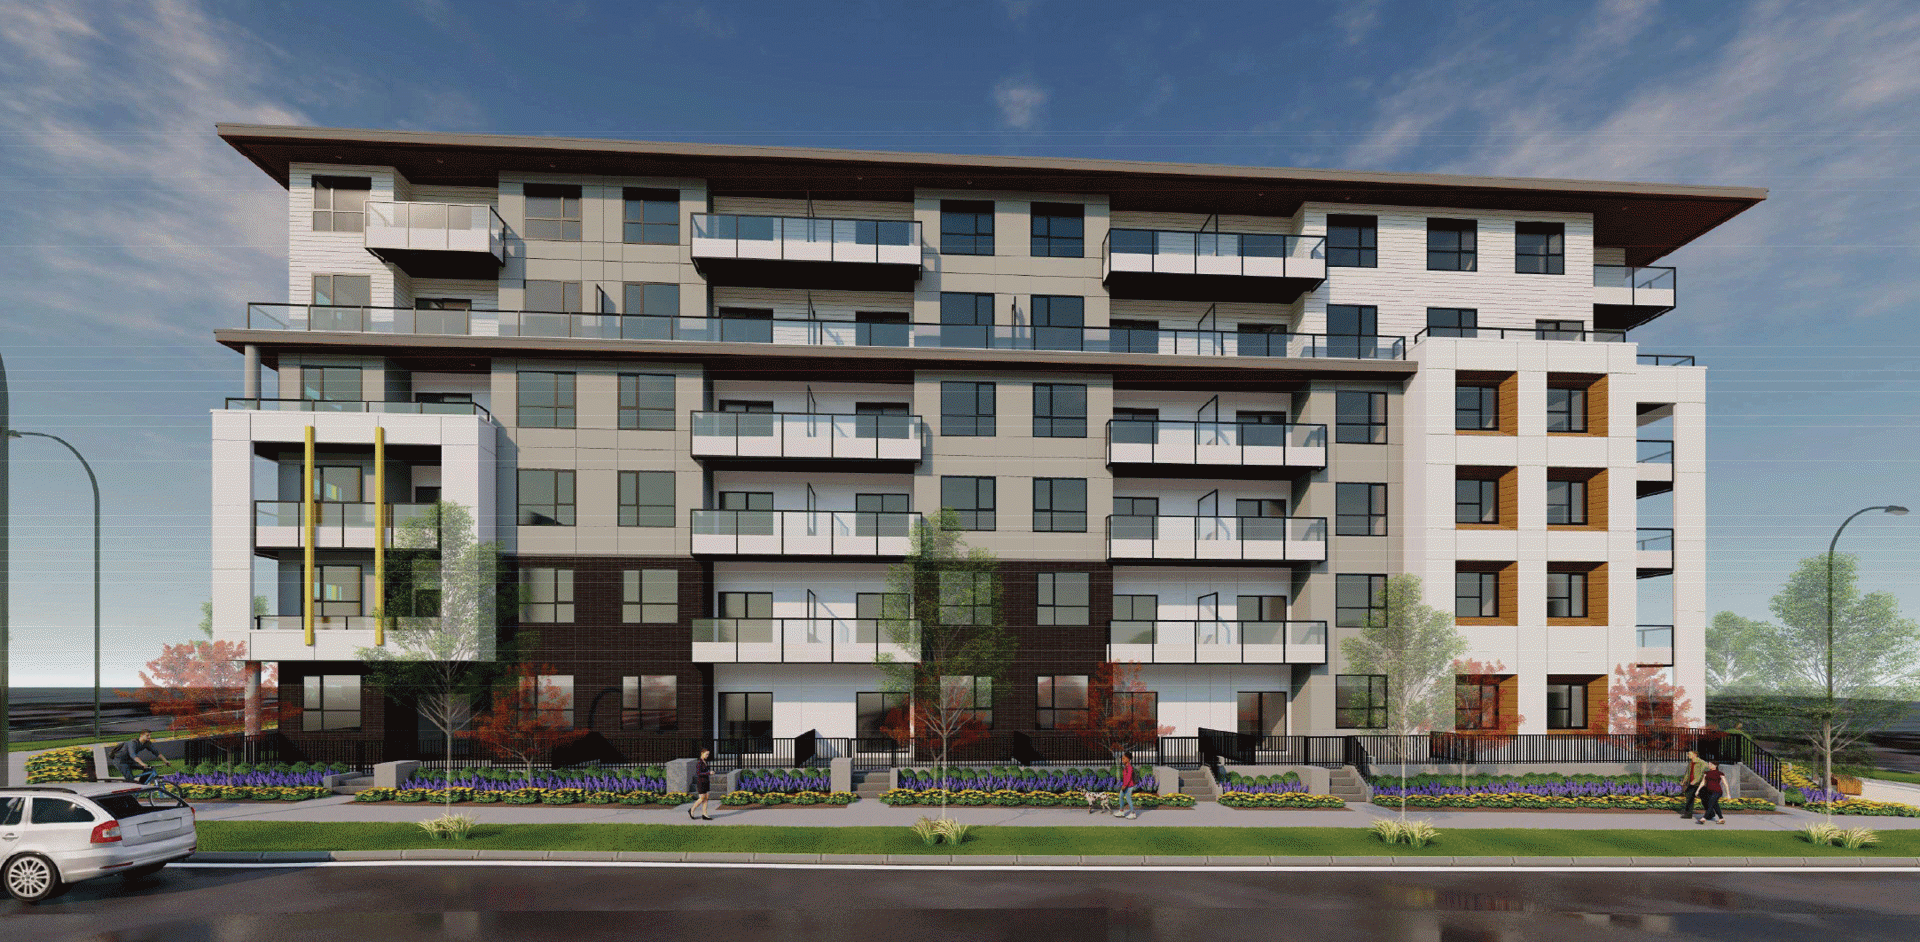 A 6-storey woodframe building with a collection of 1- to 3-bedroom West Coquitlam condominiums.